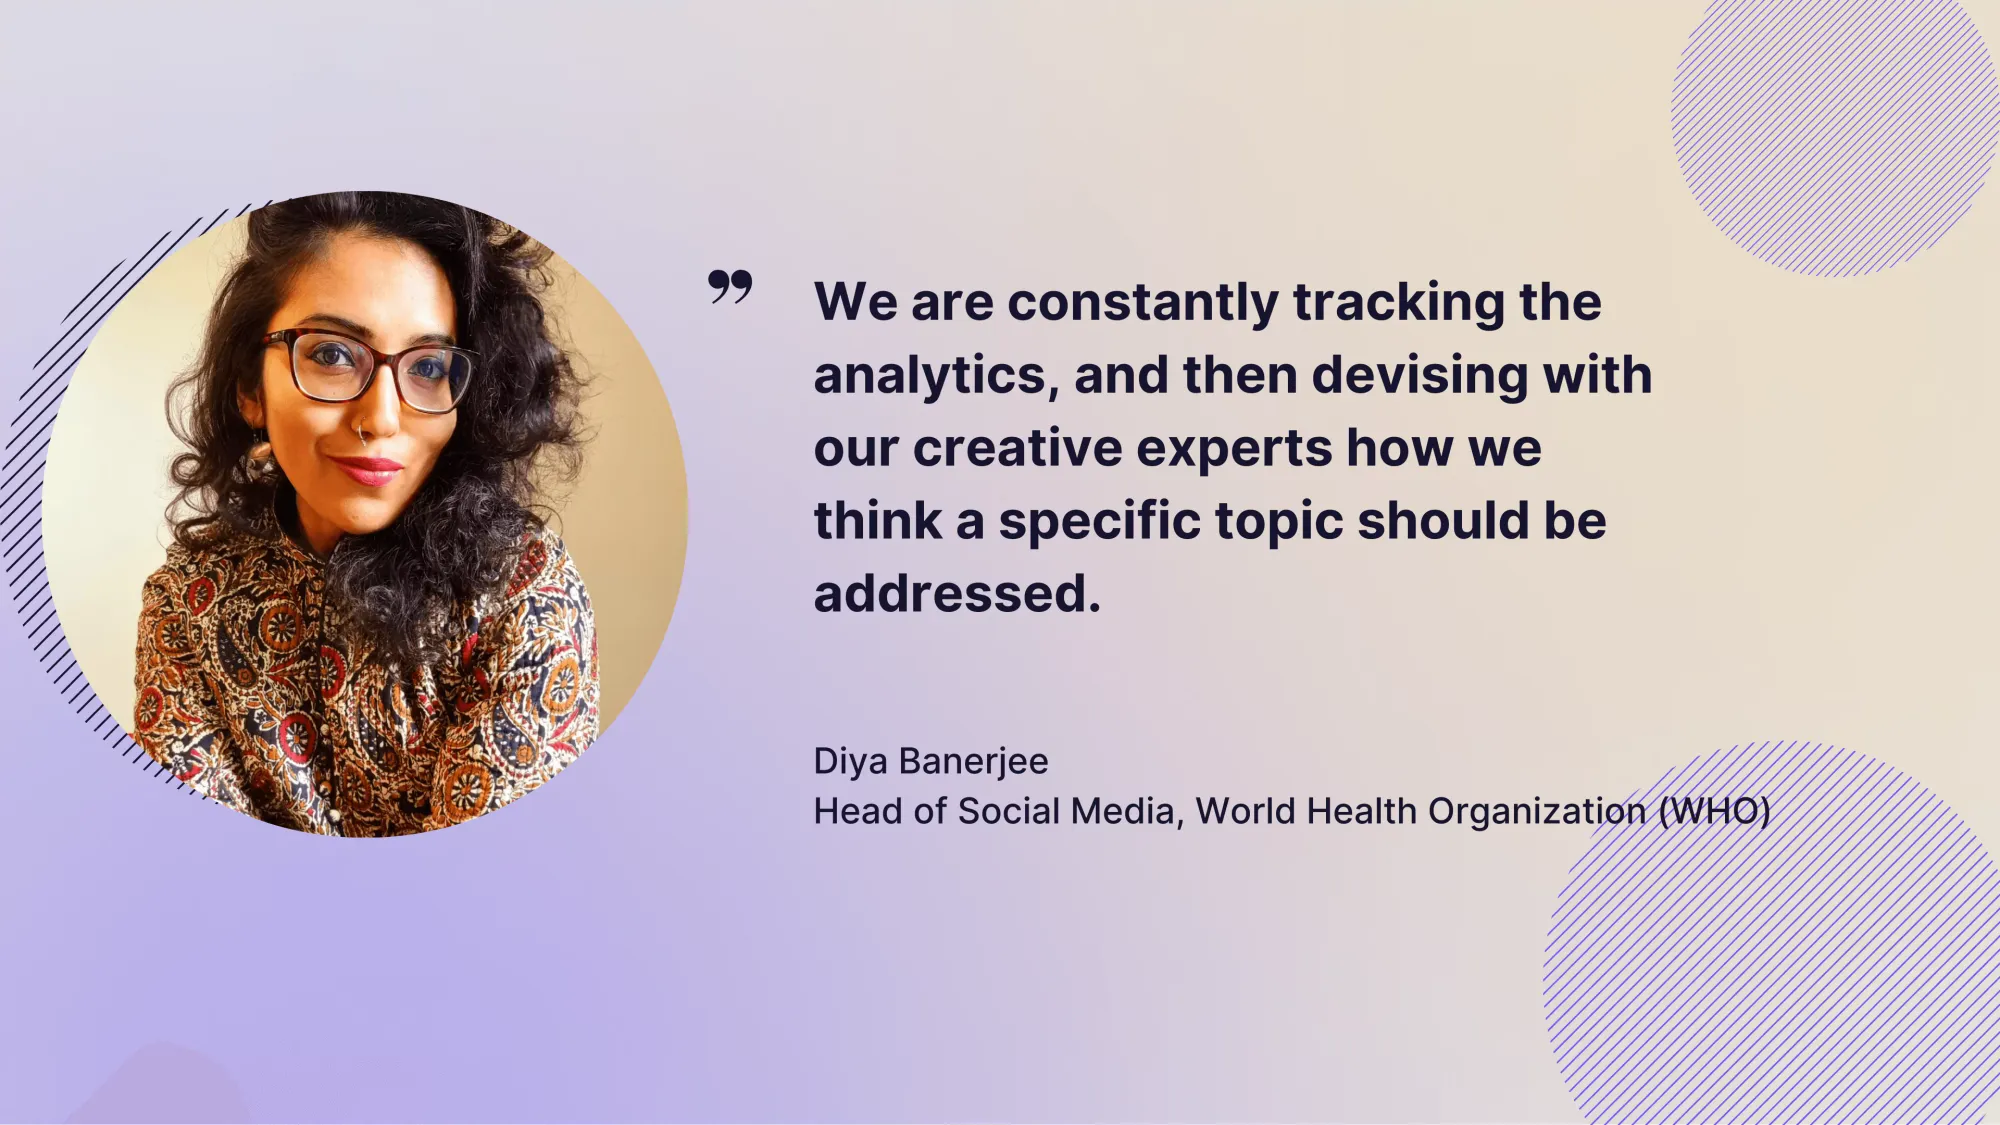 Diya Banerjee about the importance of tracking social media analytics for NGOs